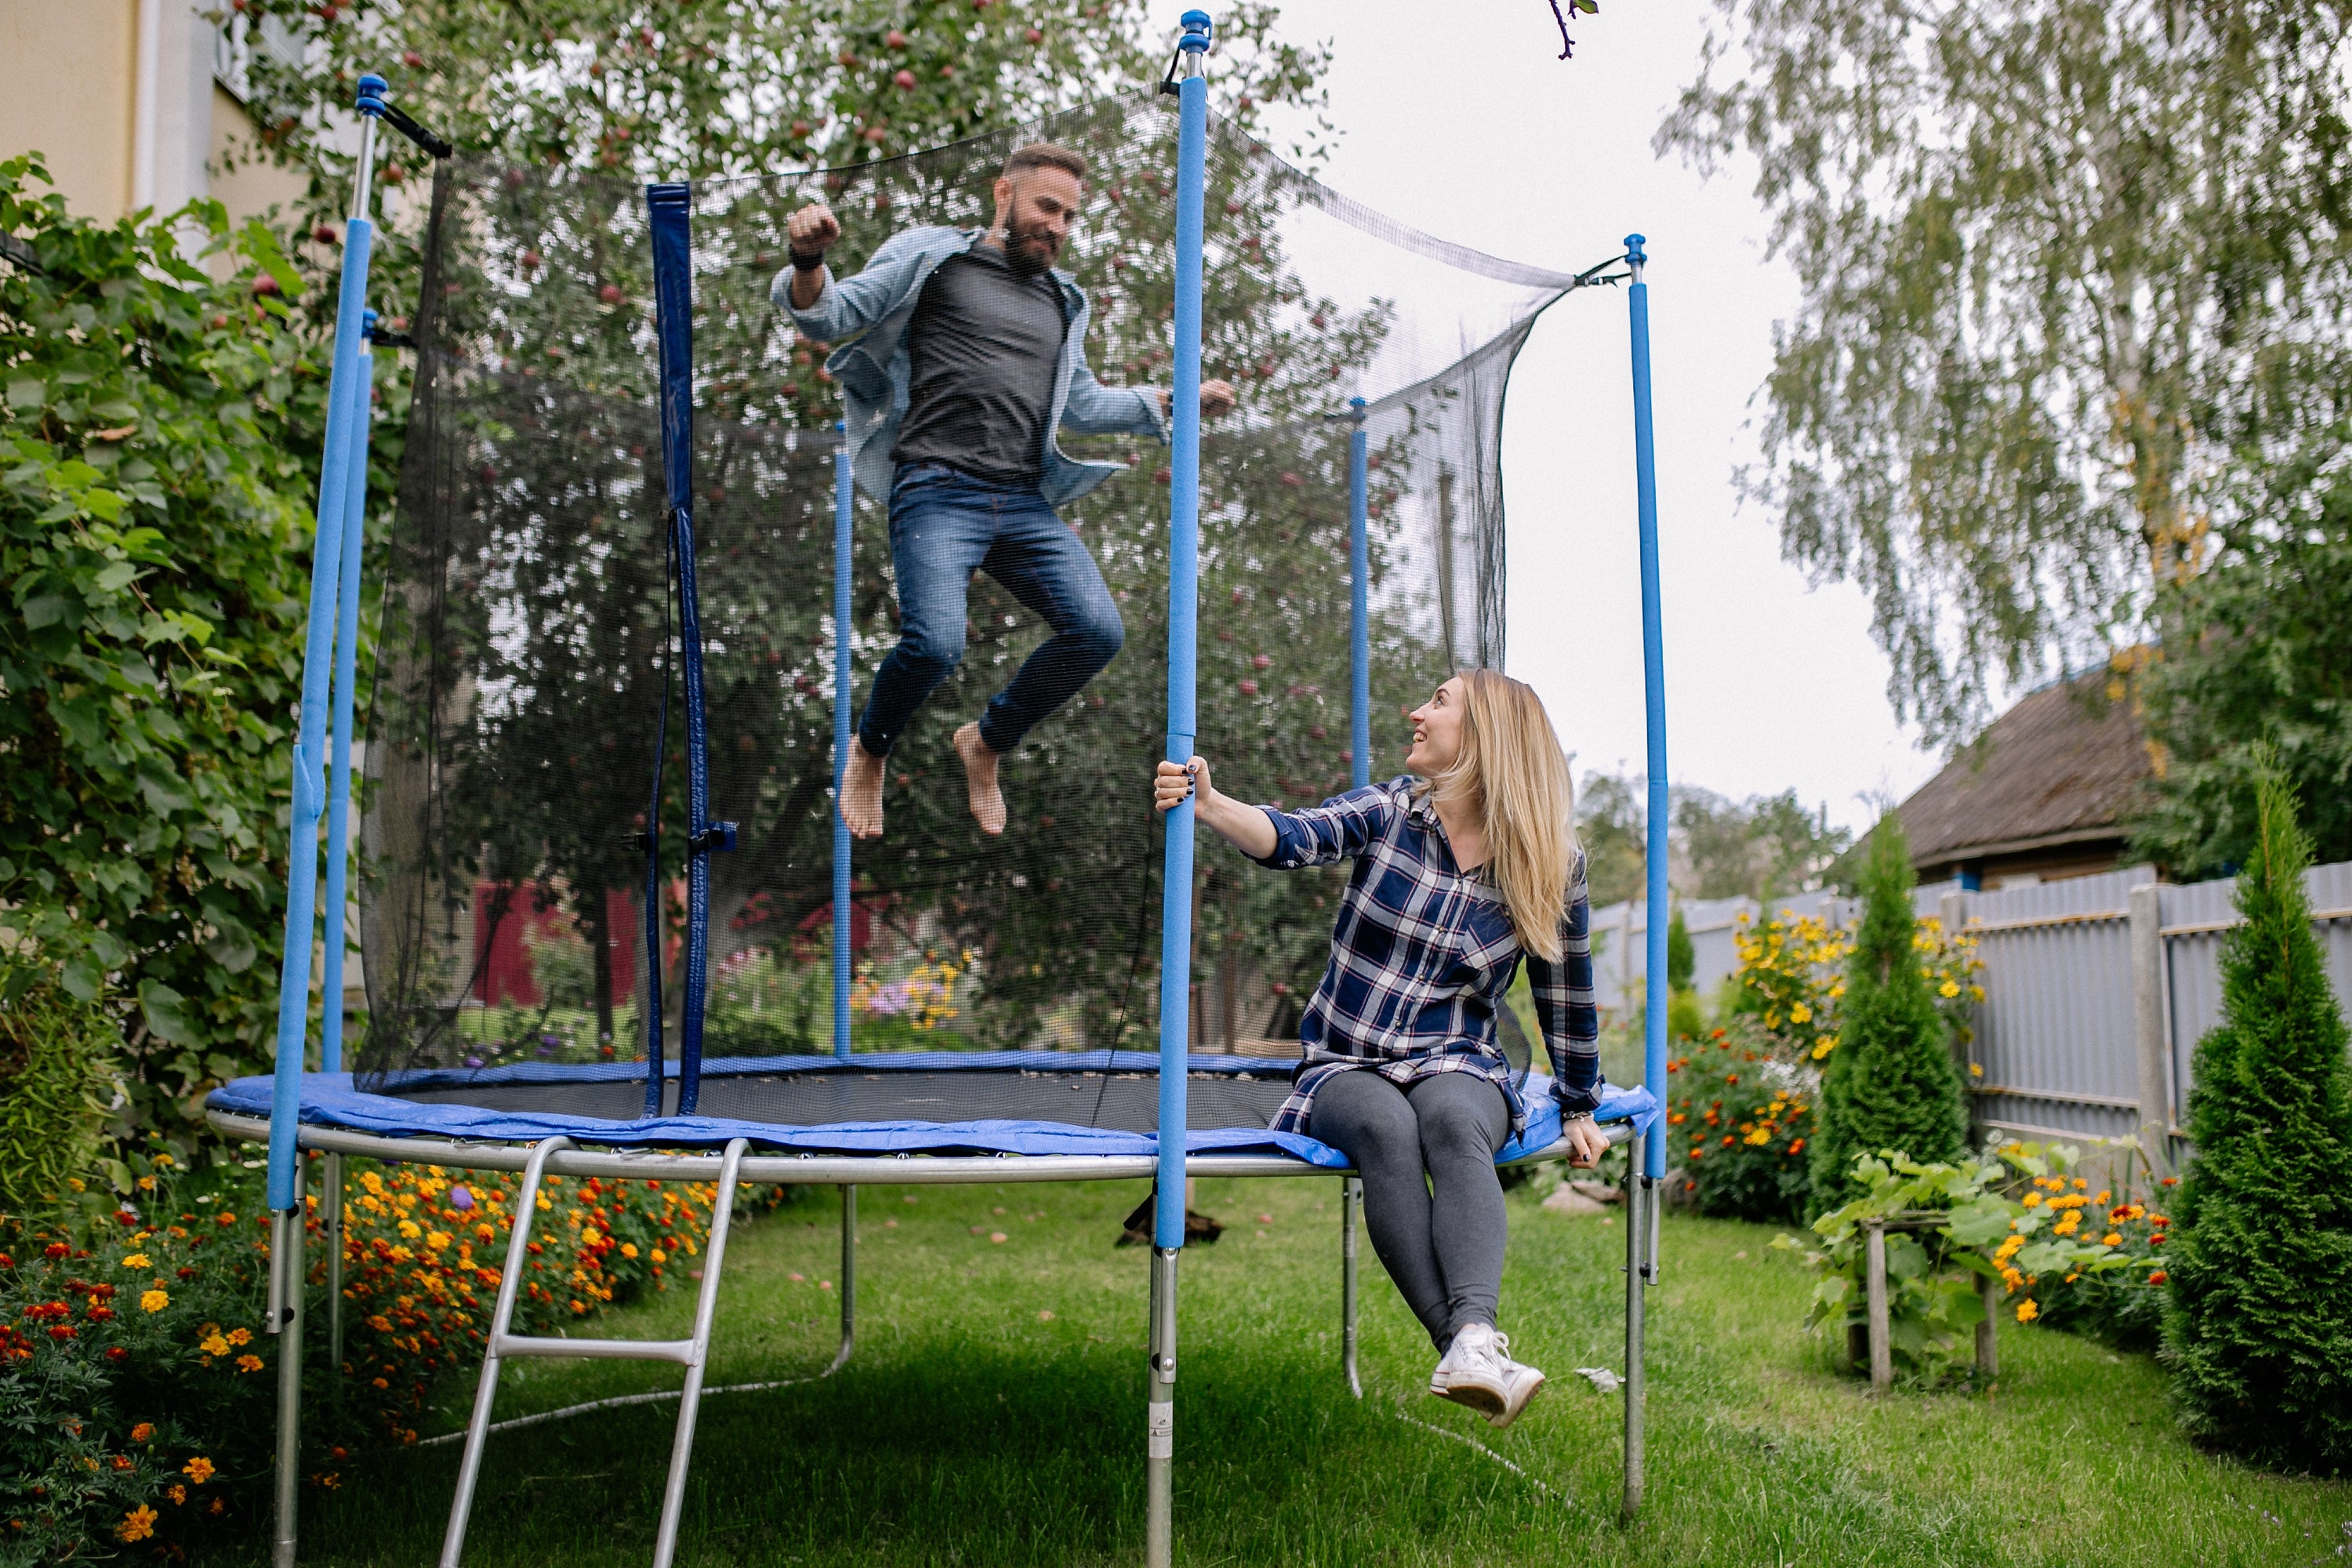 The benefits of trampoline exercise for physical and mental health